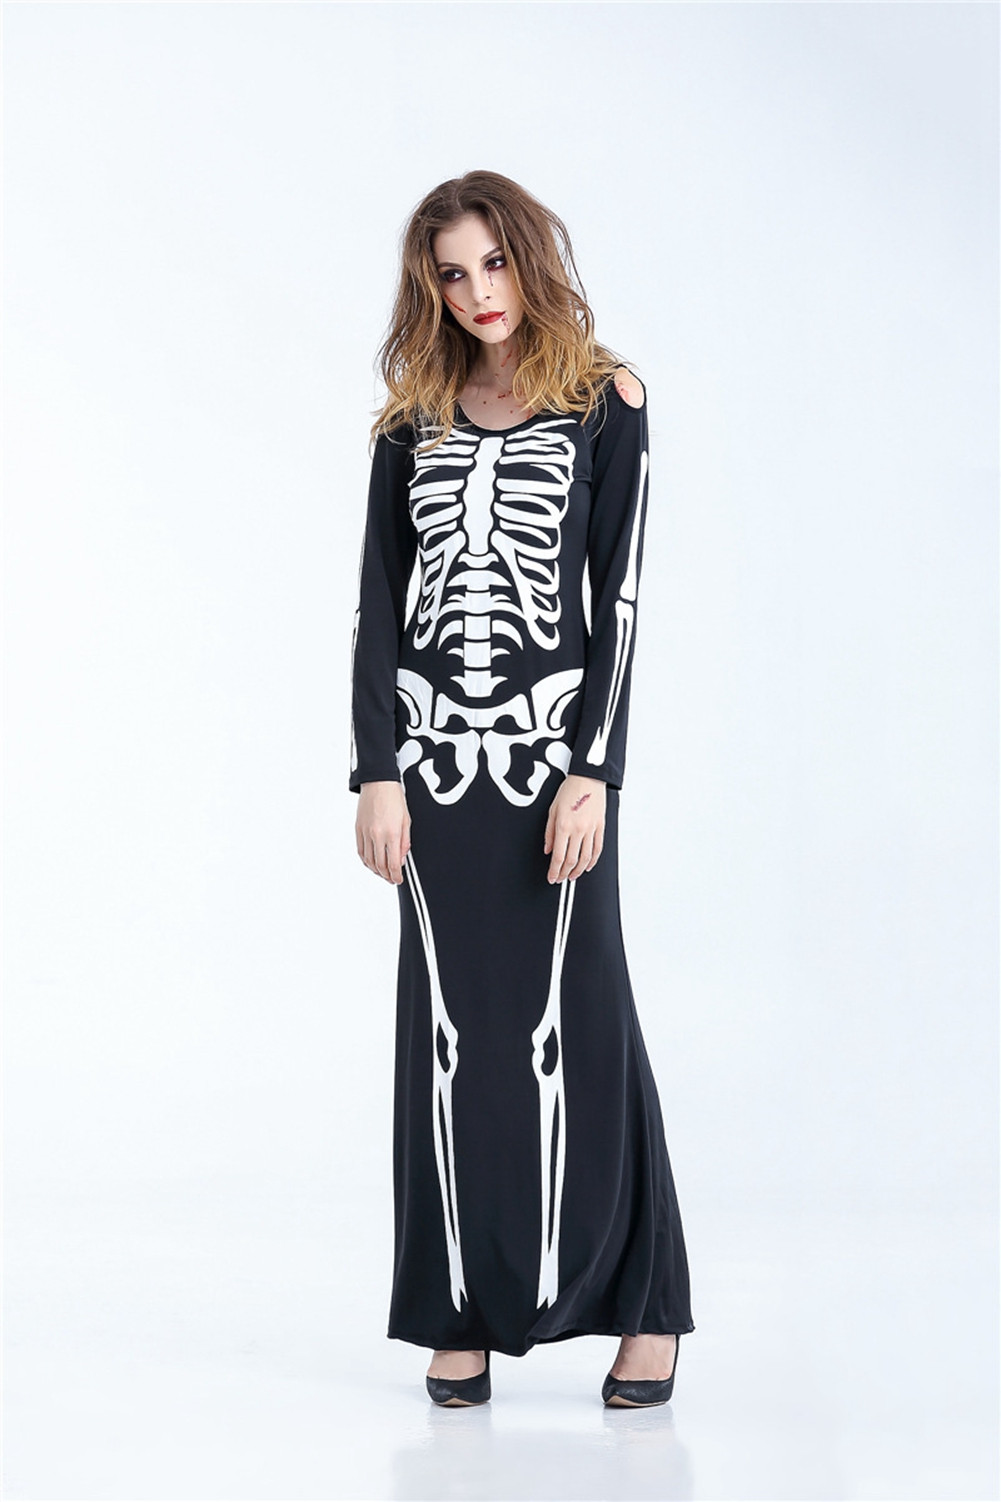 Halloween Skeleton Ghost Zombie Long Dress for Masquerade，Party or Stage Showing Costume